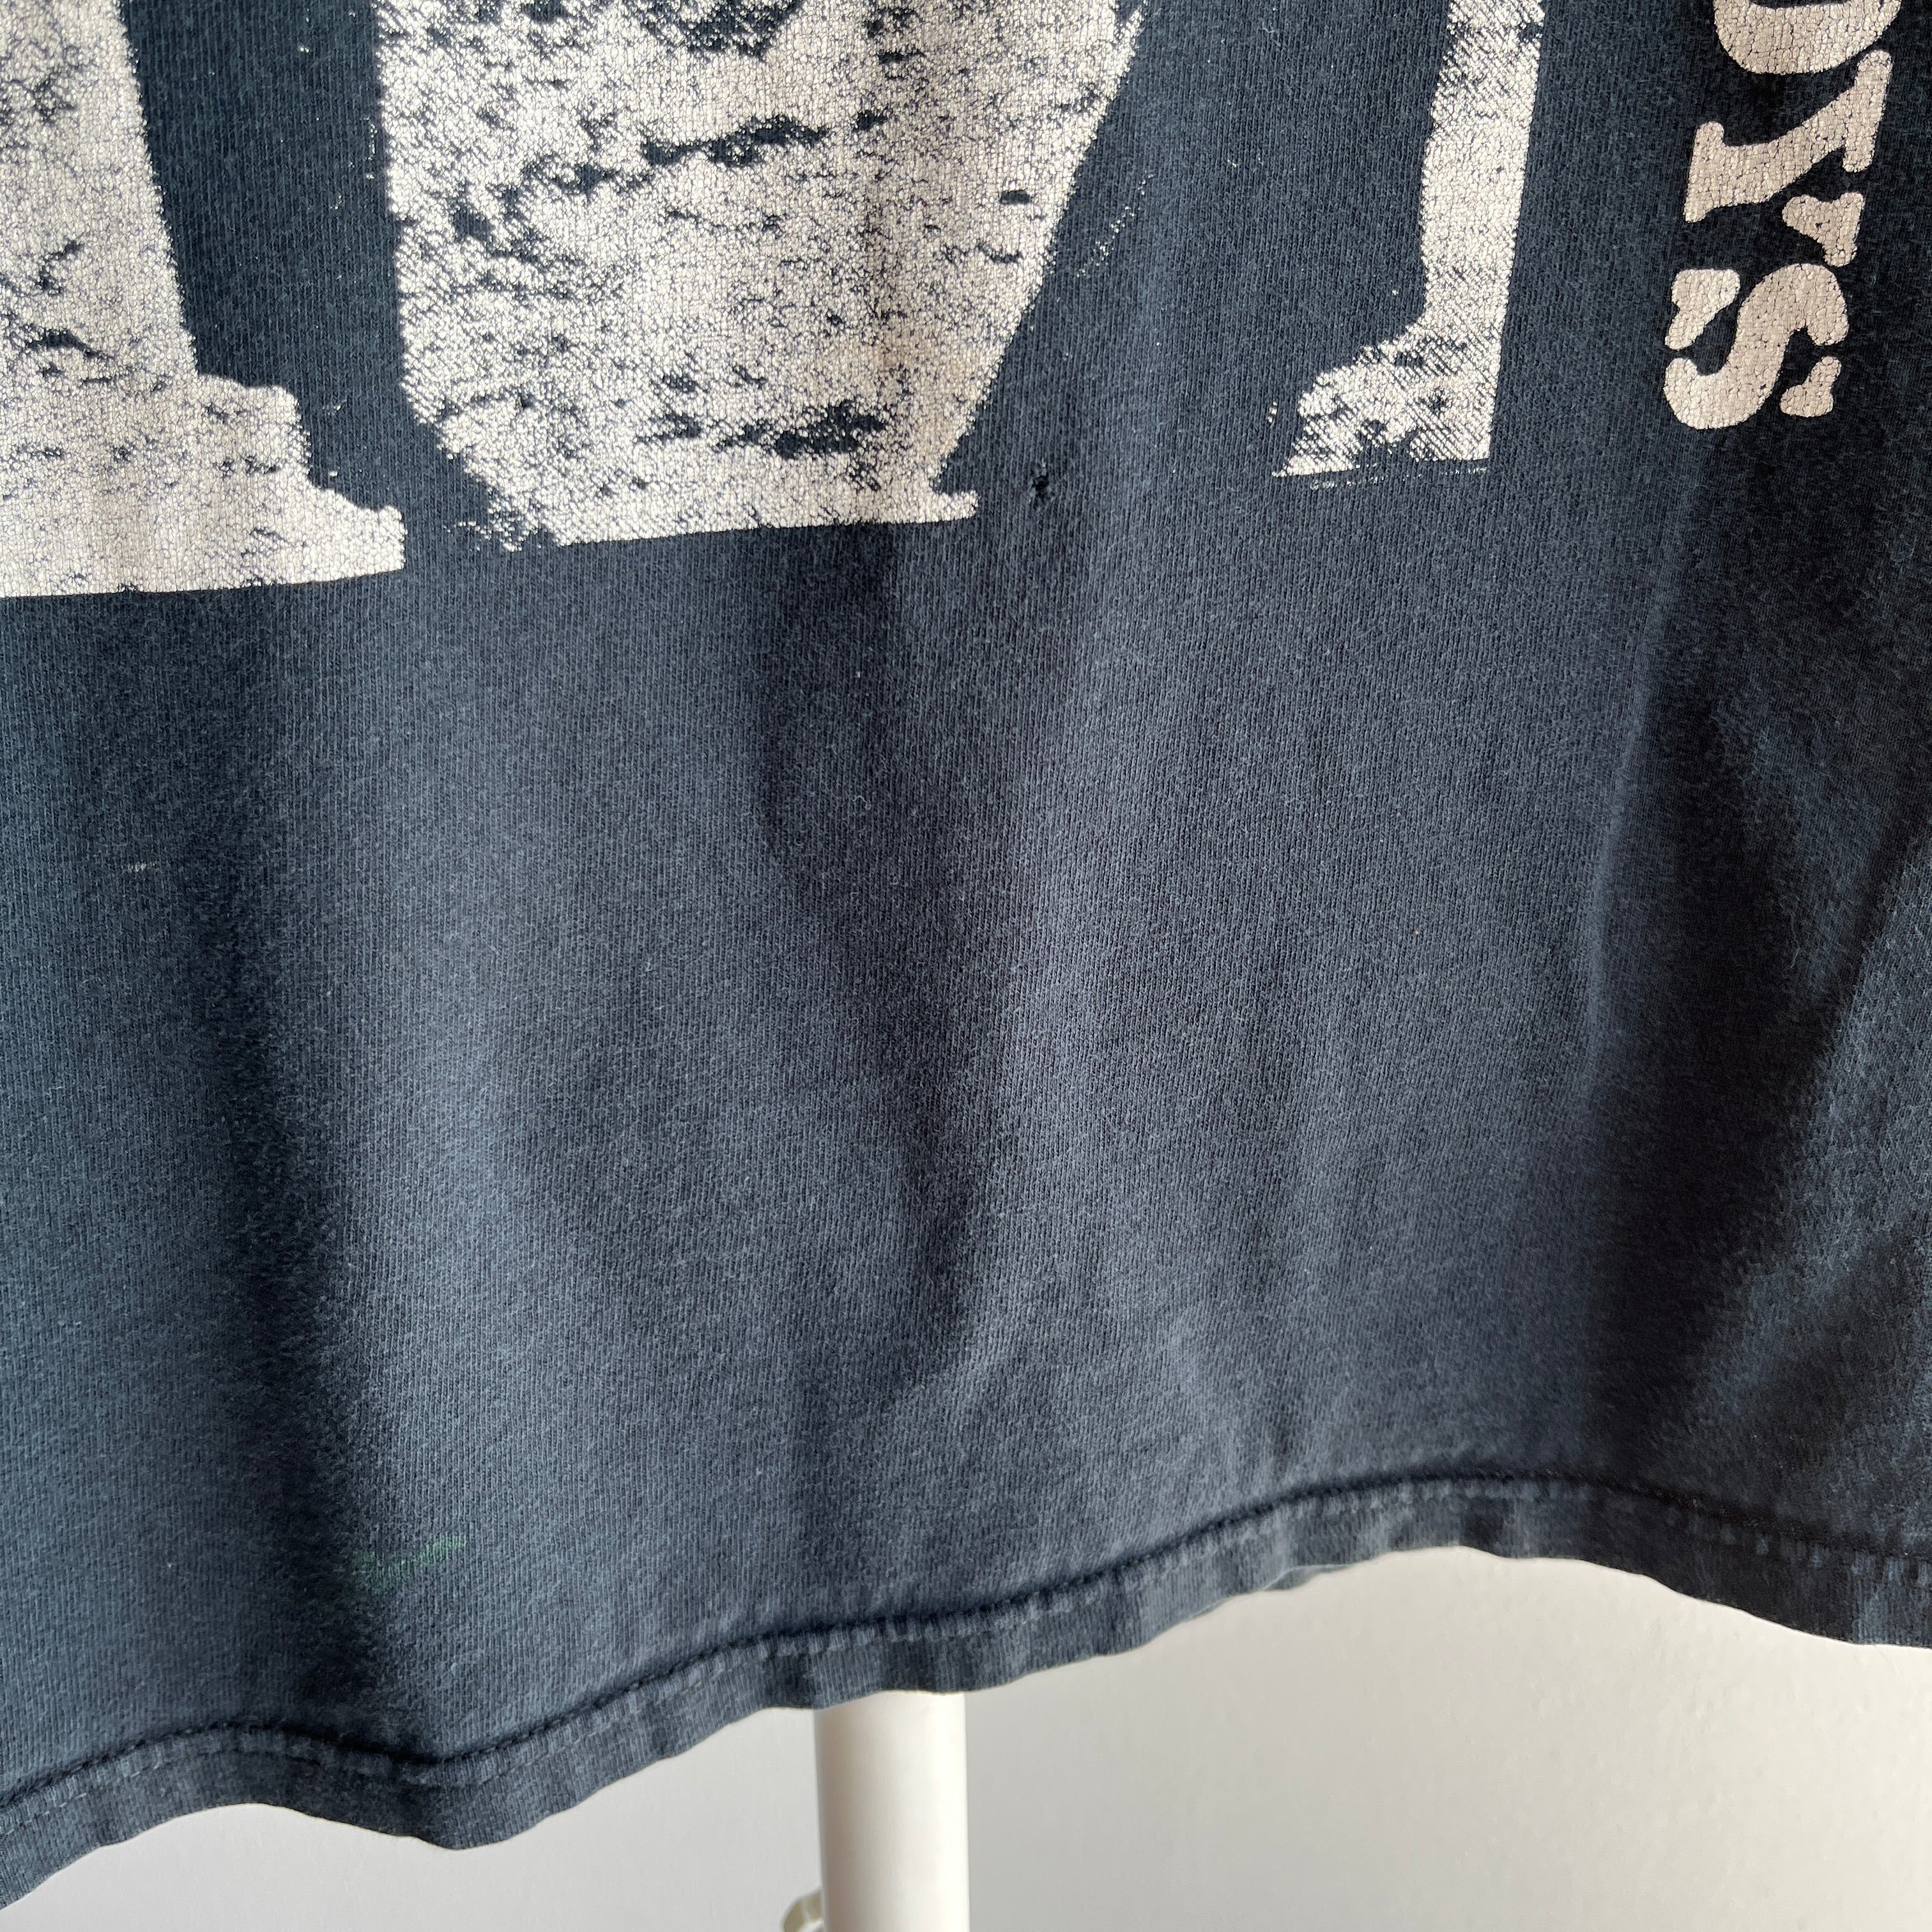 2000s Dead Kennedys Cut and Mended Nicely Worn DIY Muscle Tank